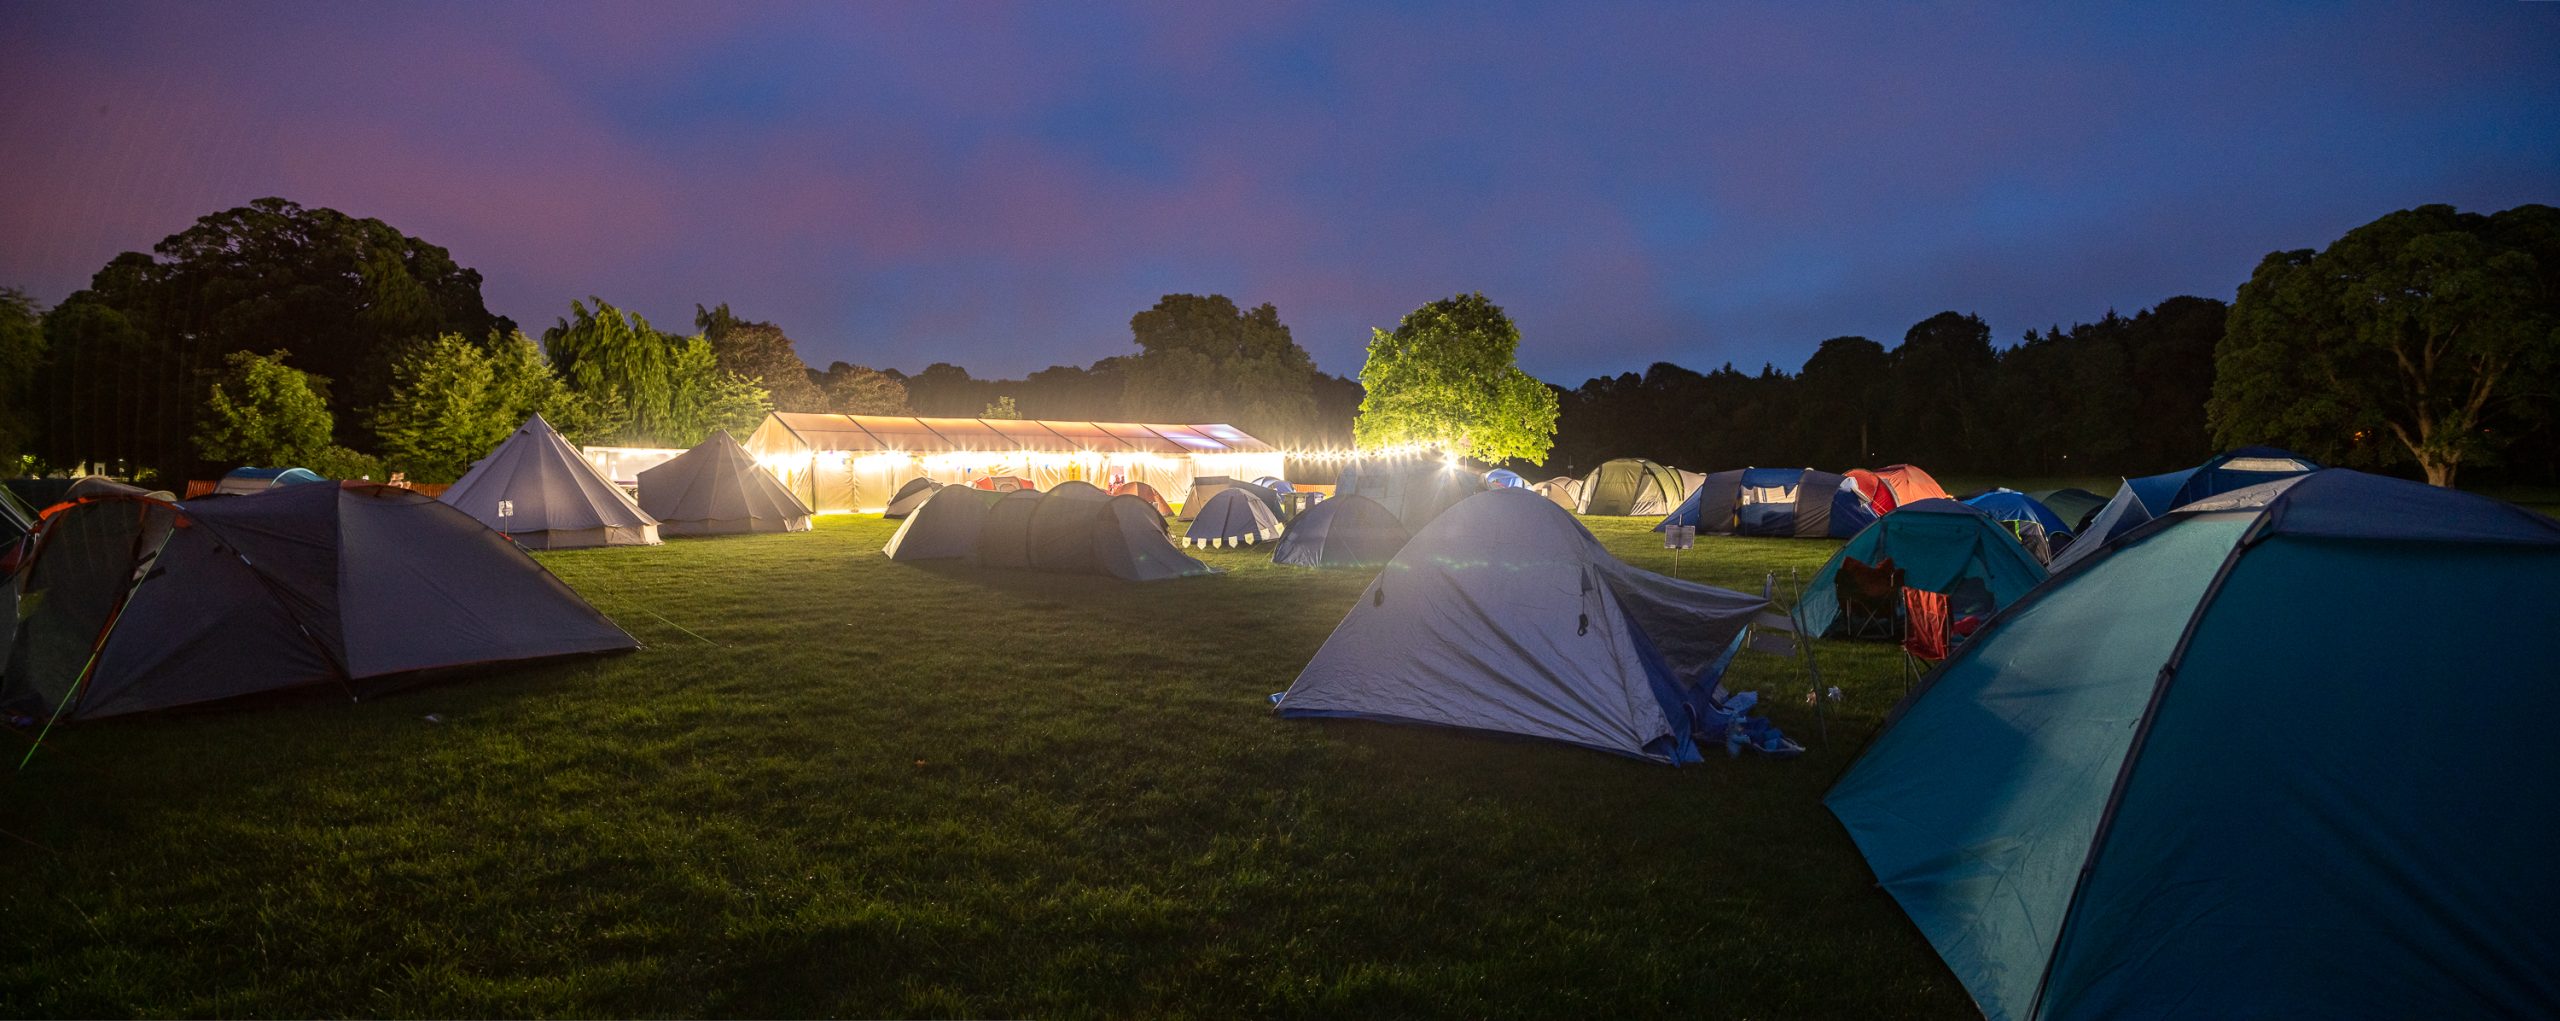 Quiz Fri 5 July 2019 NFYT 2019 photographer Andy Catlin • www.andycatlin.com 5721 Pano scaled